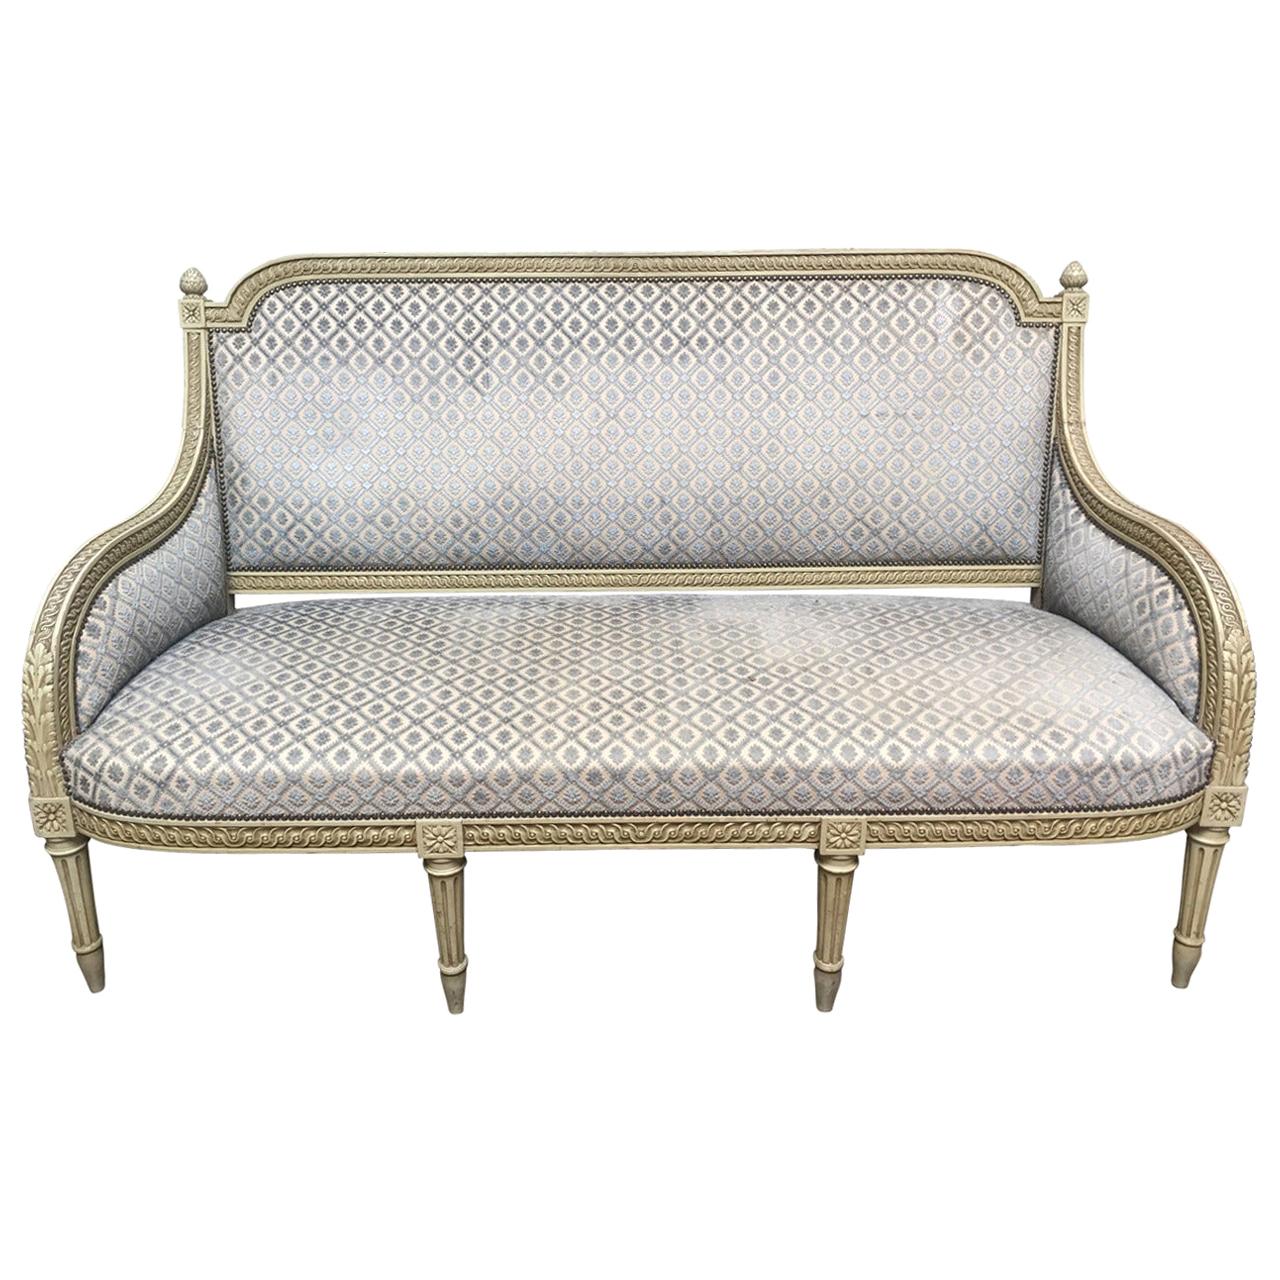 French Louis XVI Style Carved Wood Sofa with a Gray Green Painted Finish For Sale